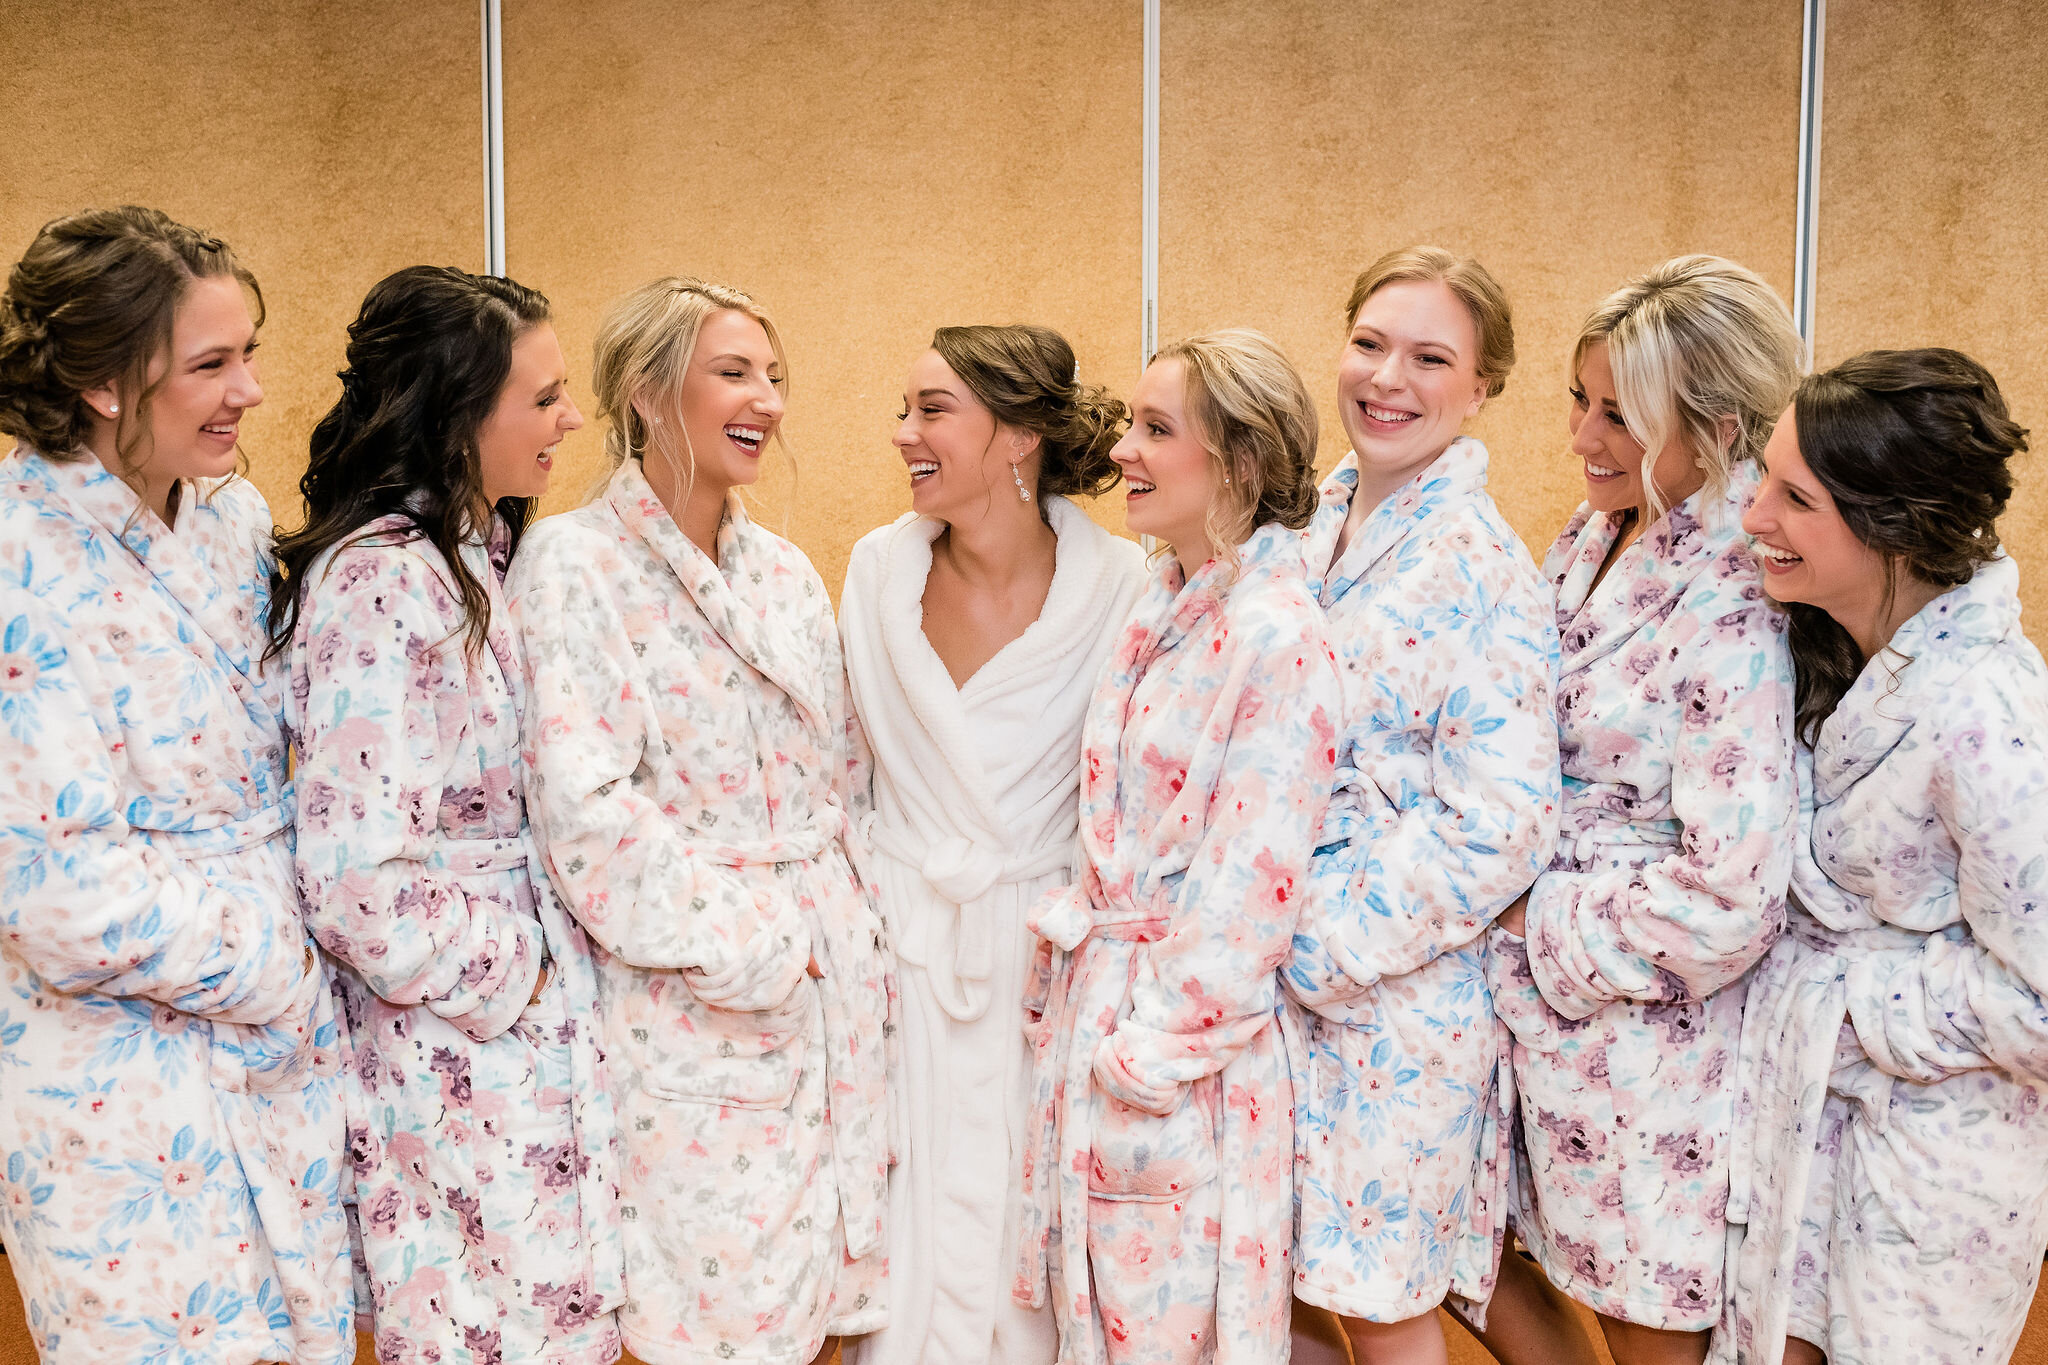 Bride and bridesmaids in floral robes